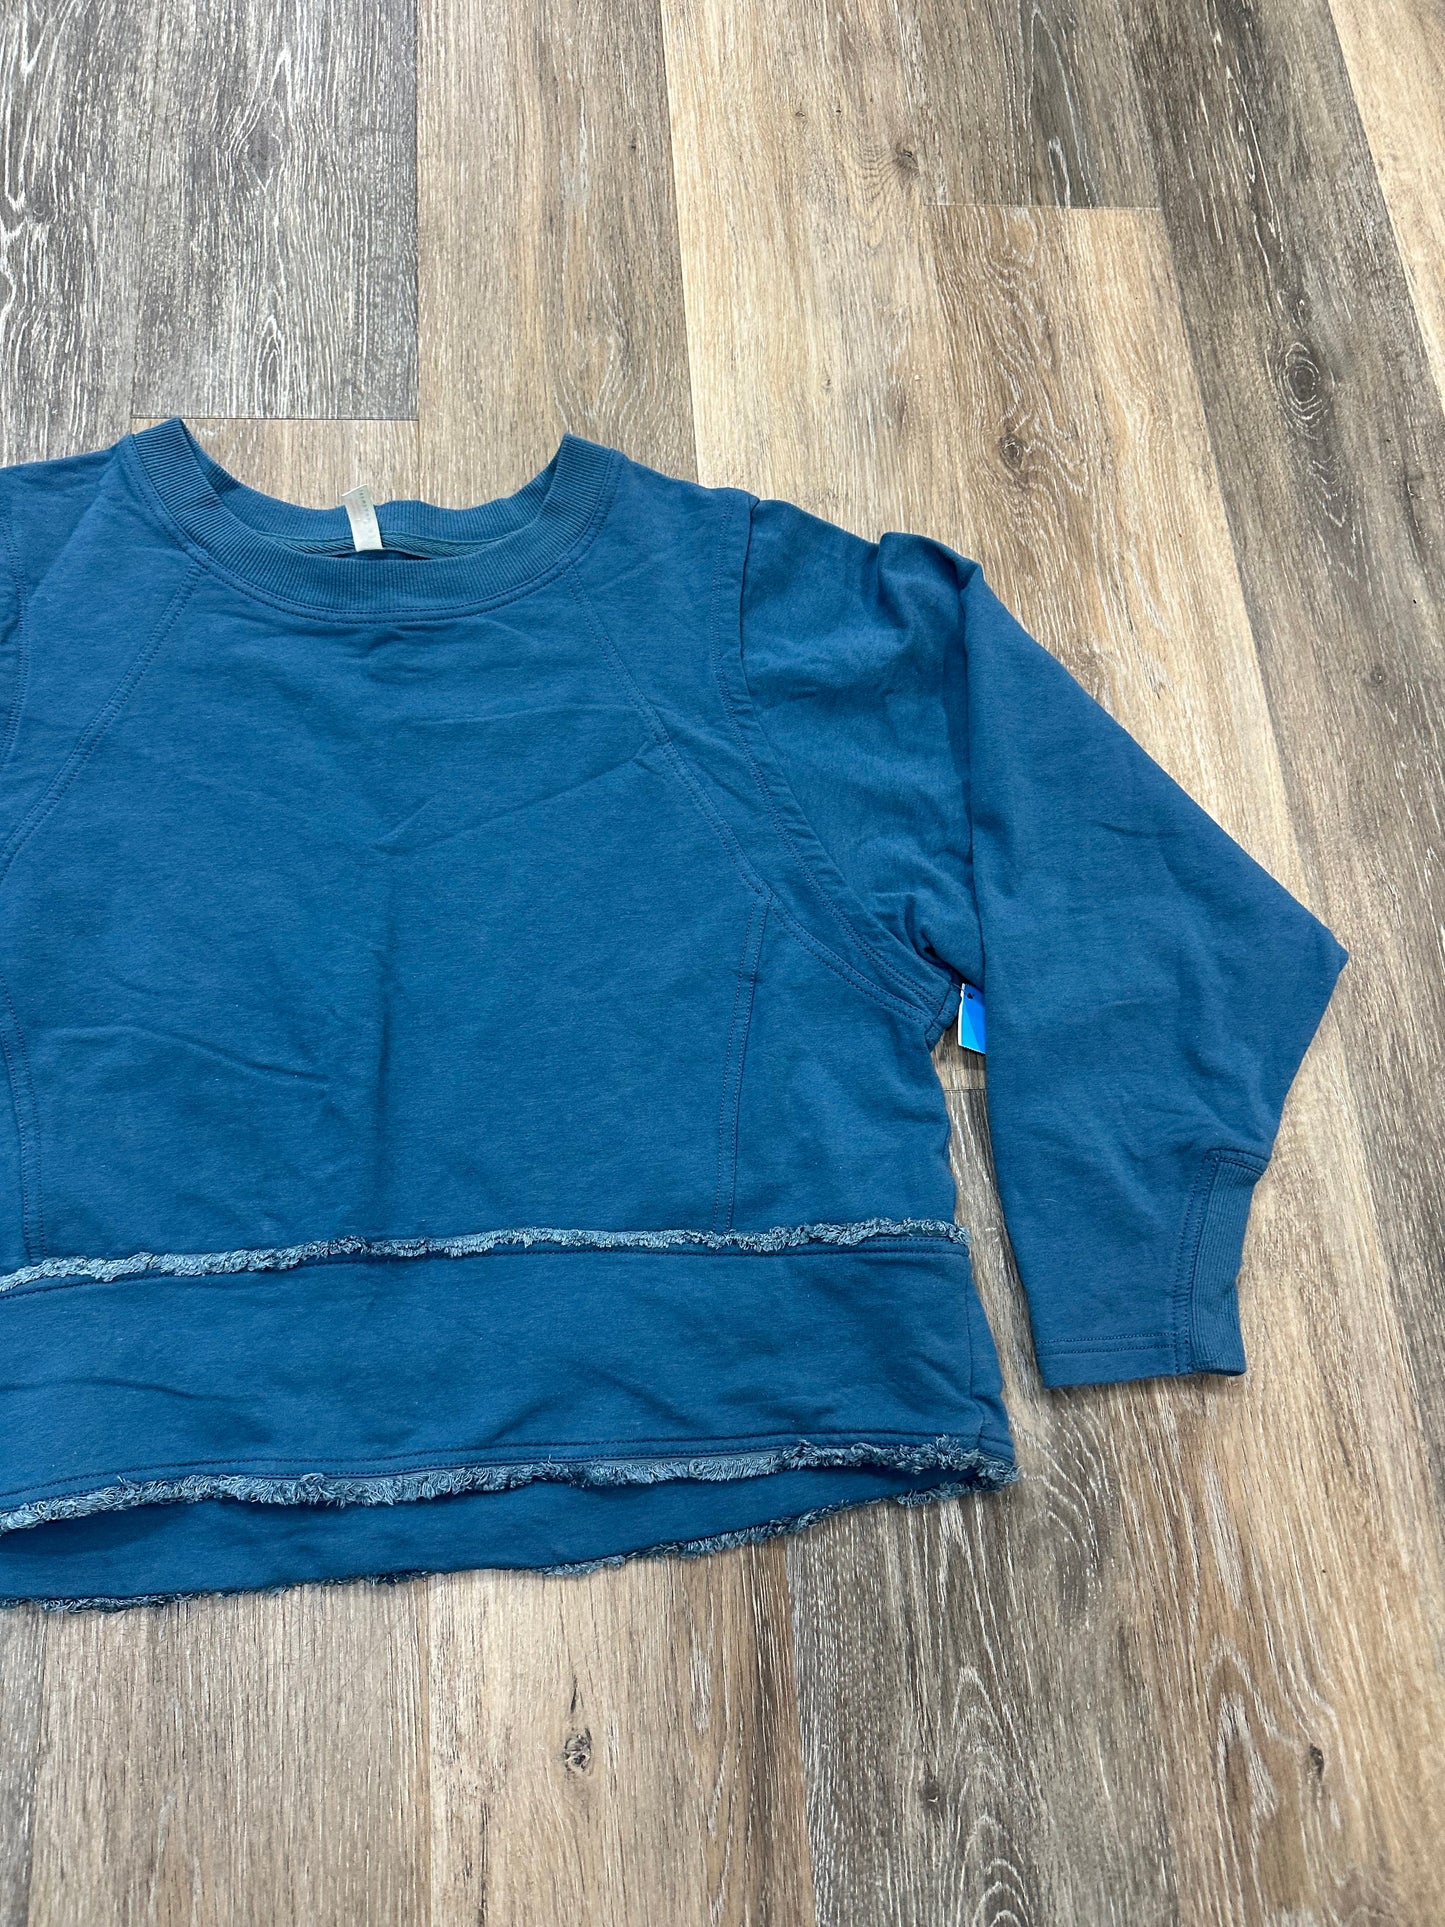 Blue Athletic Top Long Sleeve Crewneck Free People, Size M